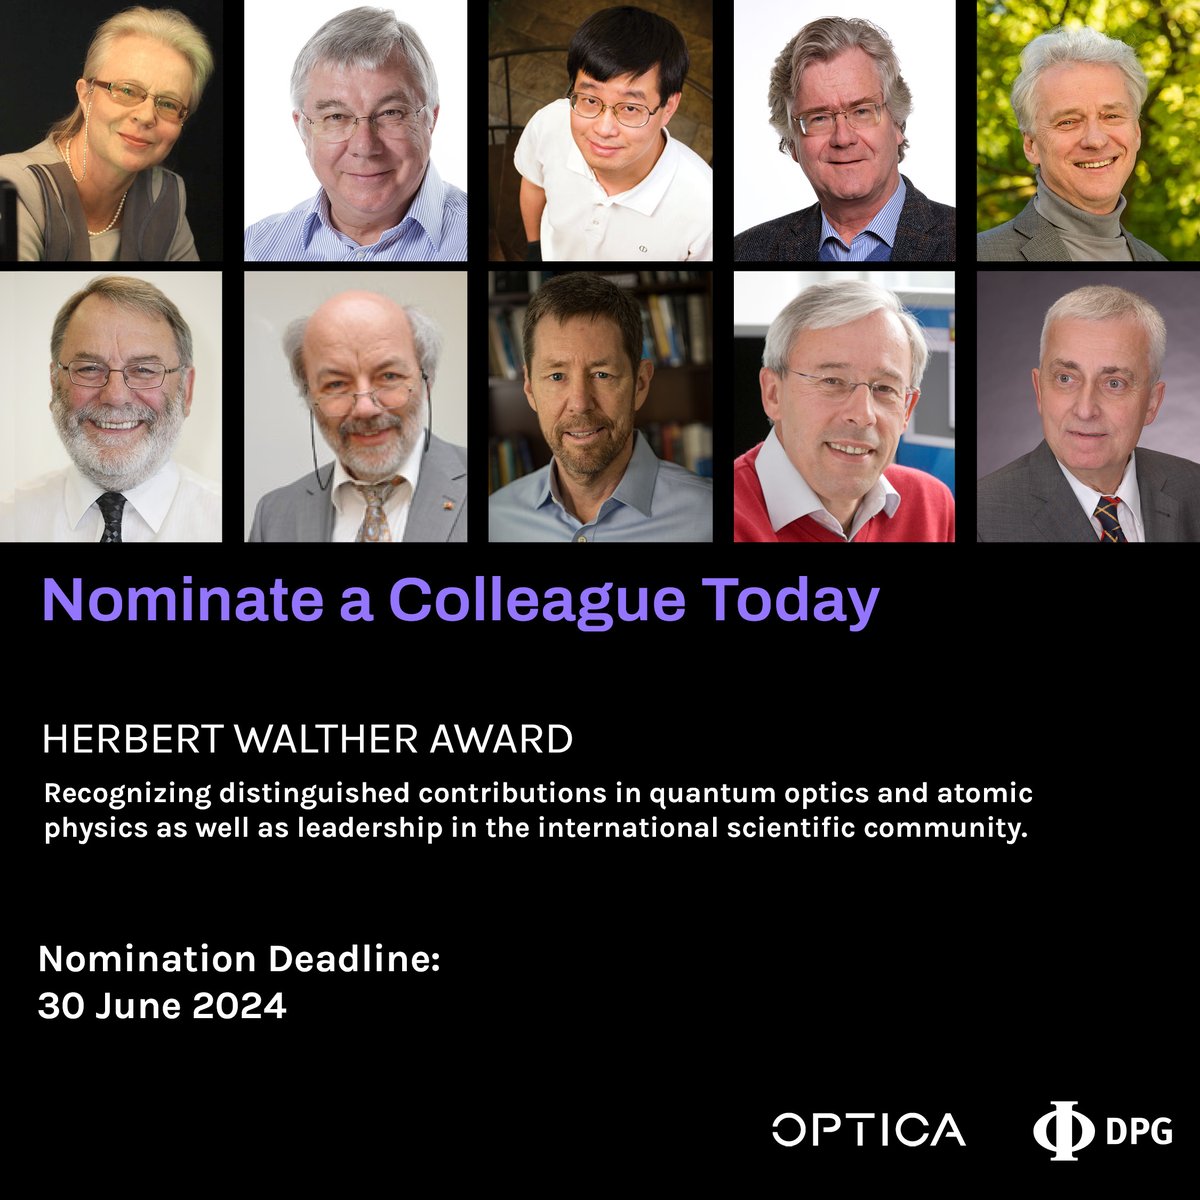 Join Optica & DPG in recognizing distinguished contributions in quantum optics/atomic physics & leadership in the international scientific community. Nominate a colleague for the Herbert Walther Award today! Learn more: optica.org/WaltherNominat… #quantum #atomicphysics